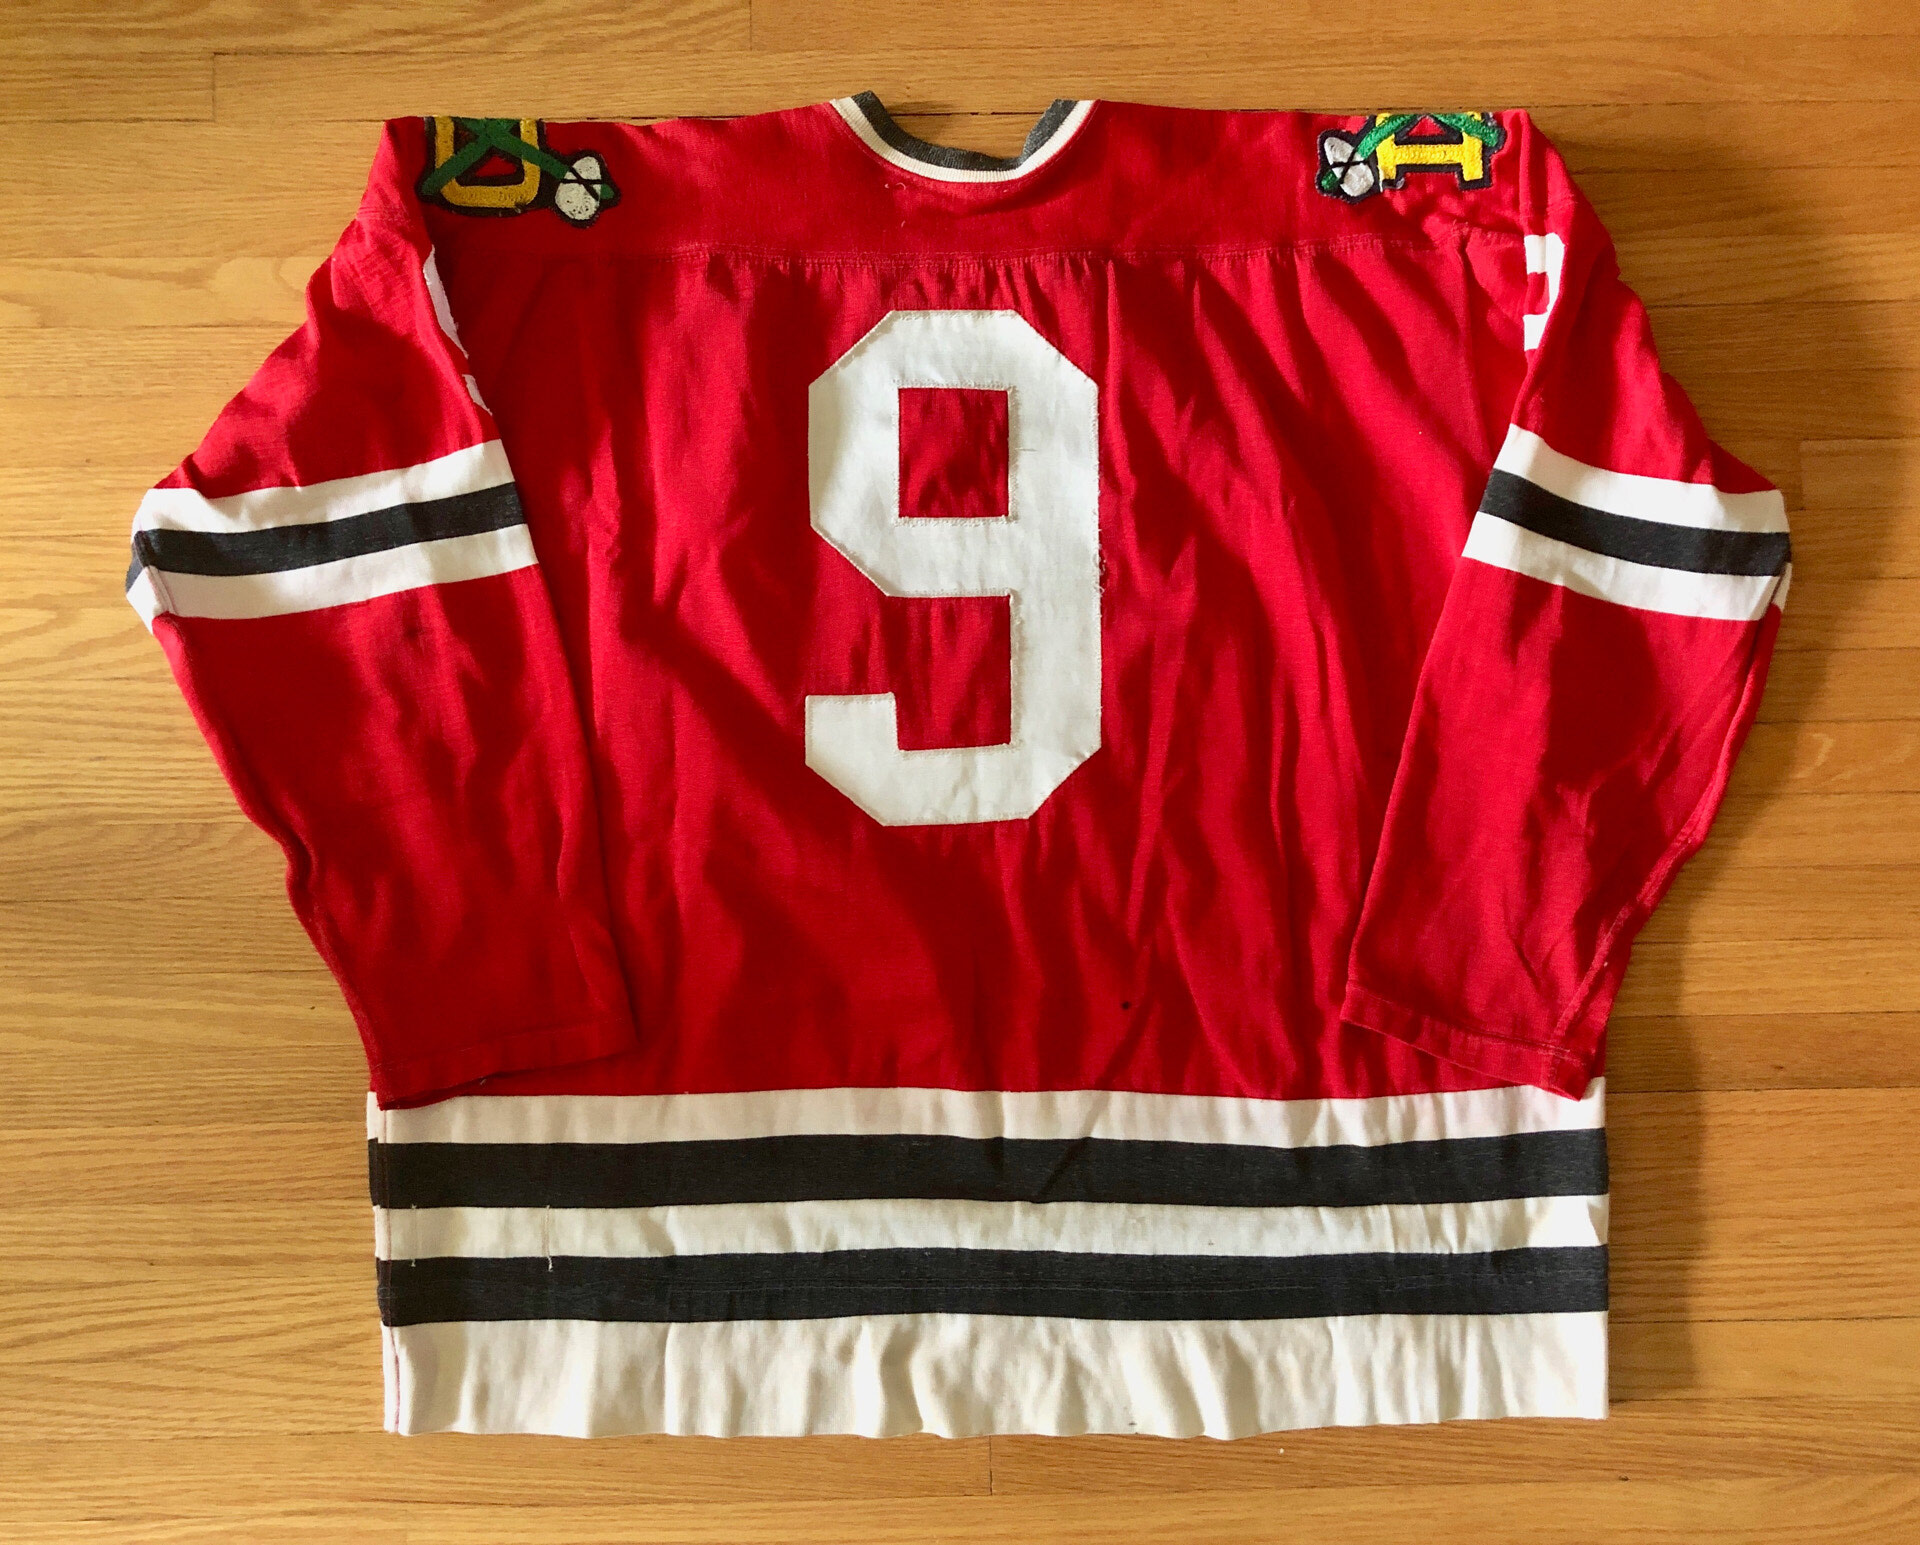 Chicago Blackhawks 1926-27 jersey artwork, This is a highly…